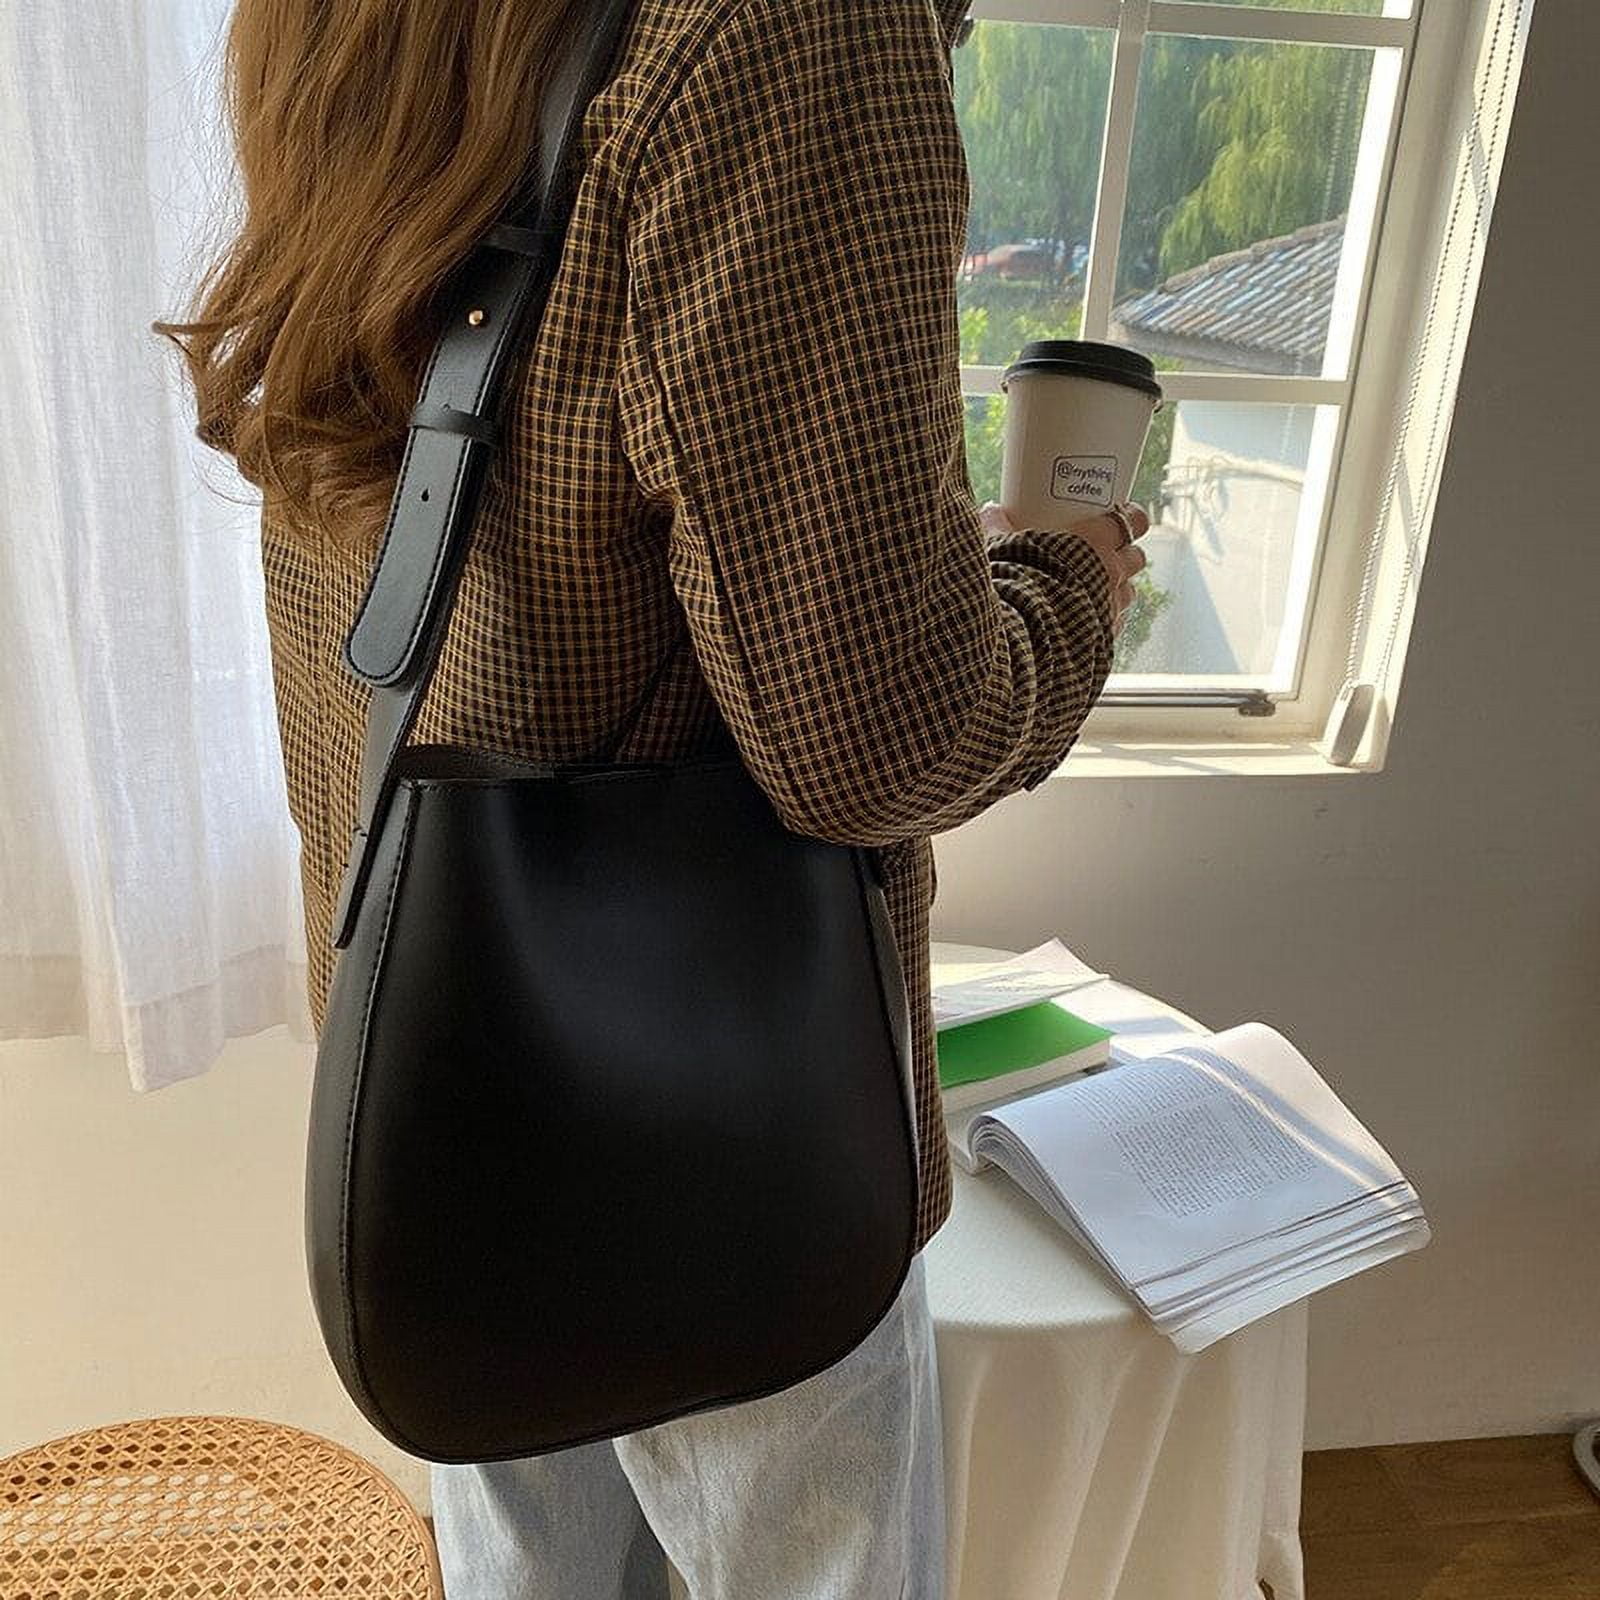 CoCopeaunt Luxury Ostrich Pattern Handbags for Women Pu Leather Crossbody  Bag Retro Design Tote Hand Bags Female Brown Shoulder Bag 